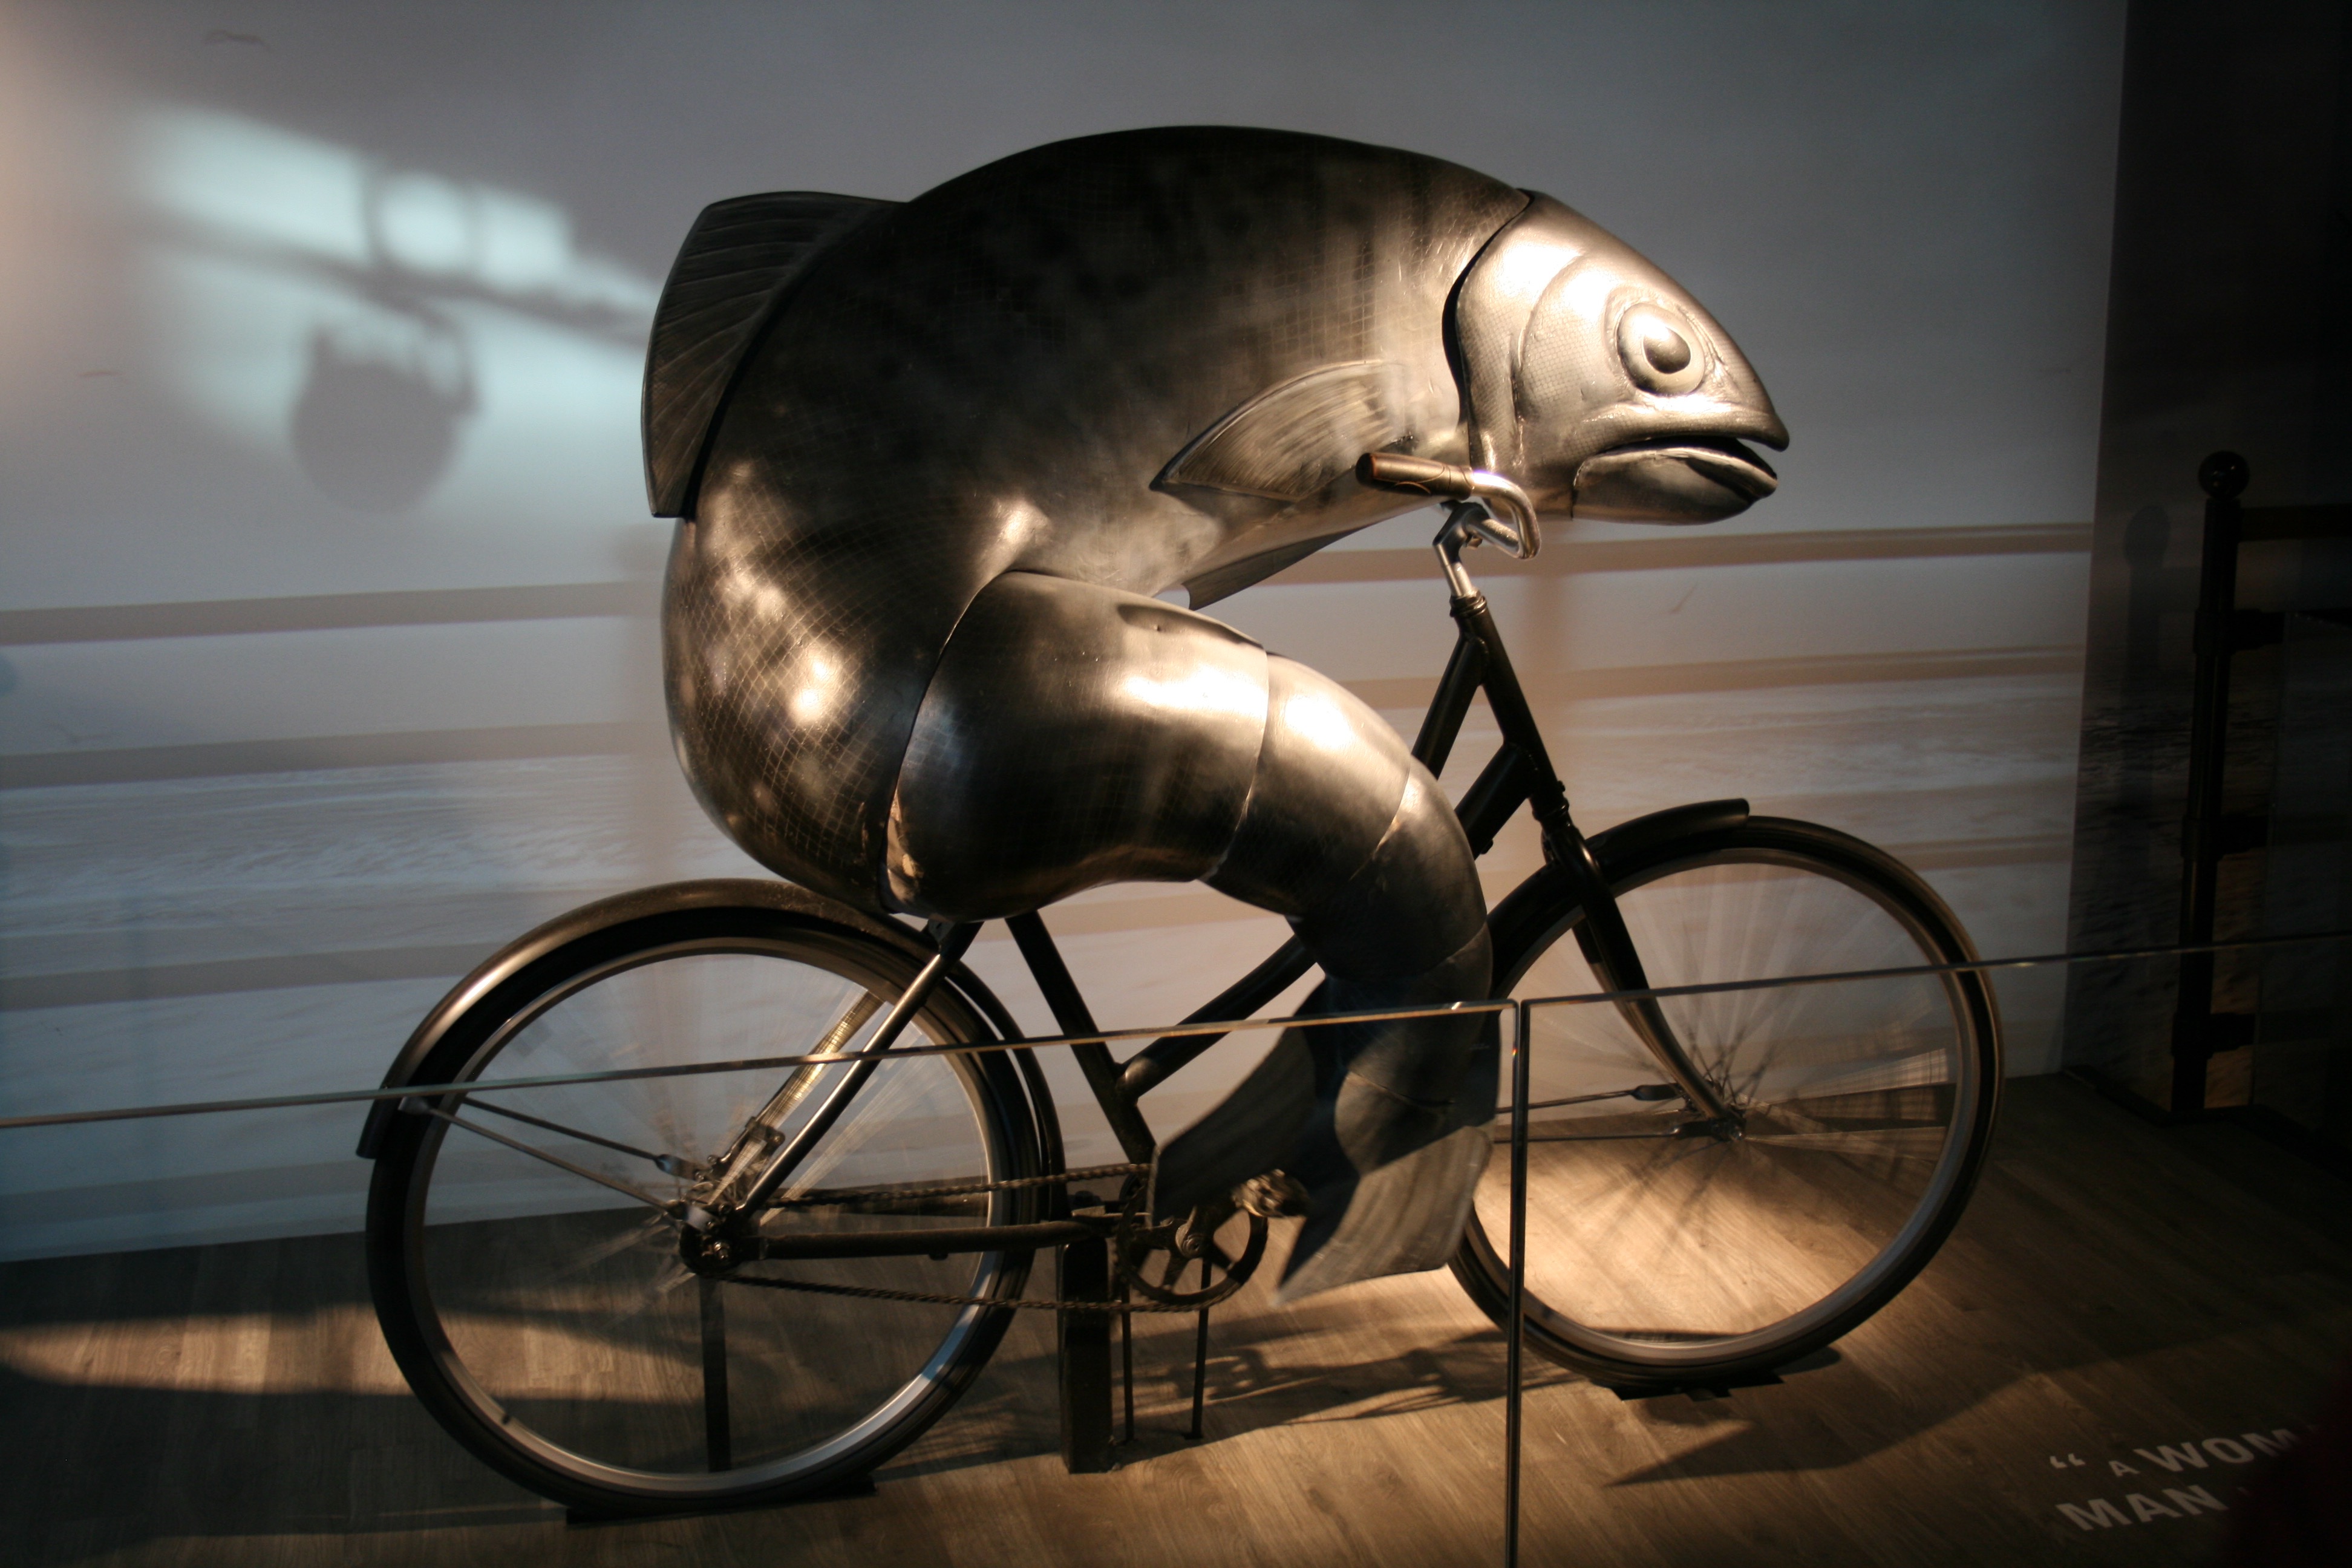 "A woman needs a man like a fish needs a bicycle." - Patricia Irene Dunn at Guinness Storehouse.